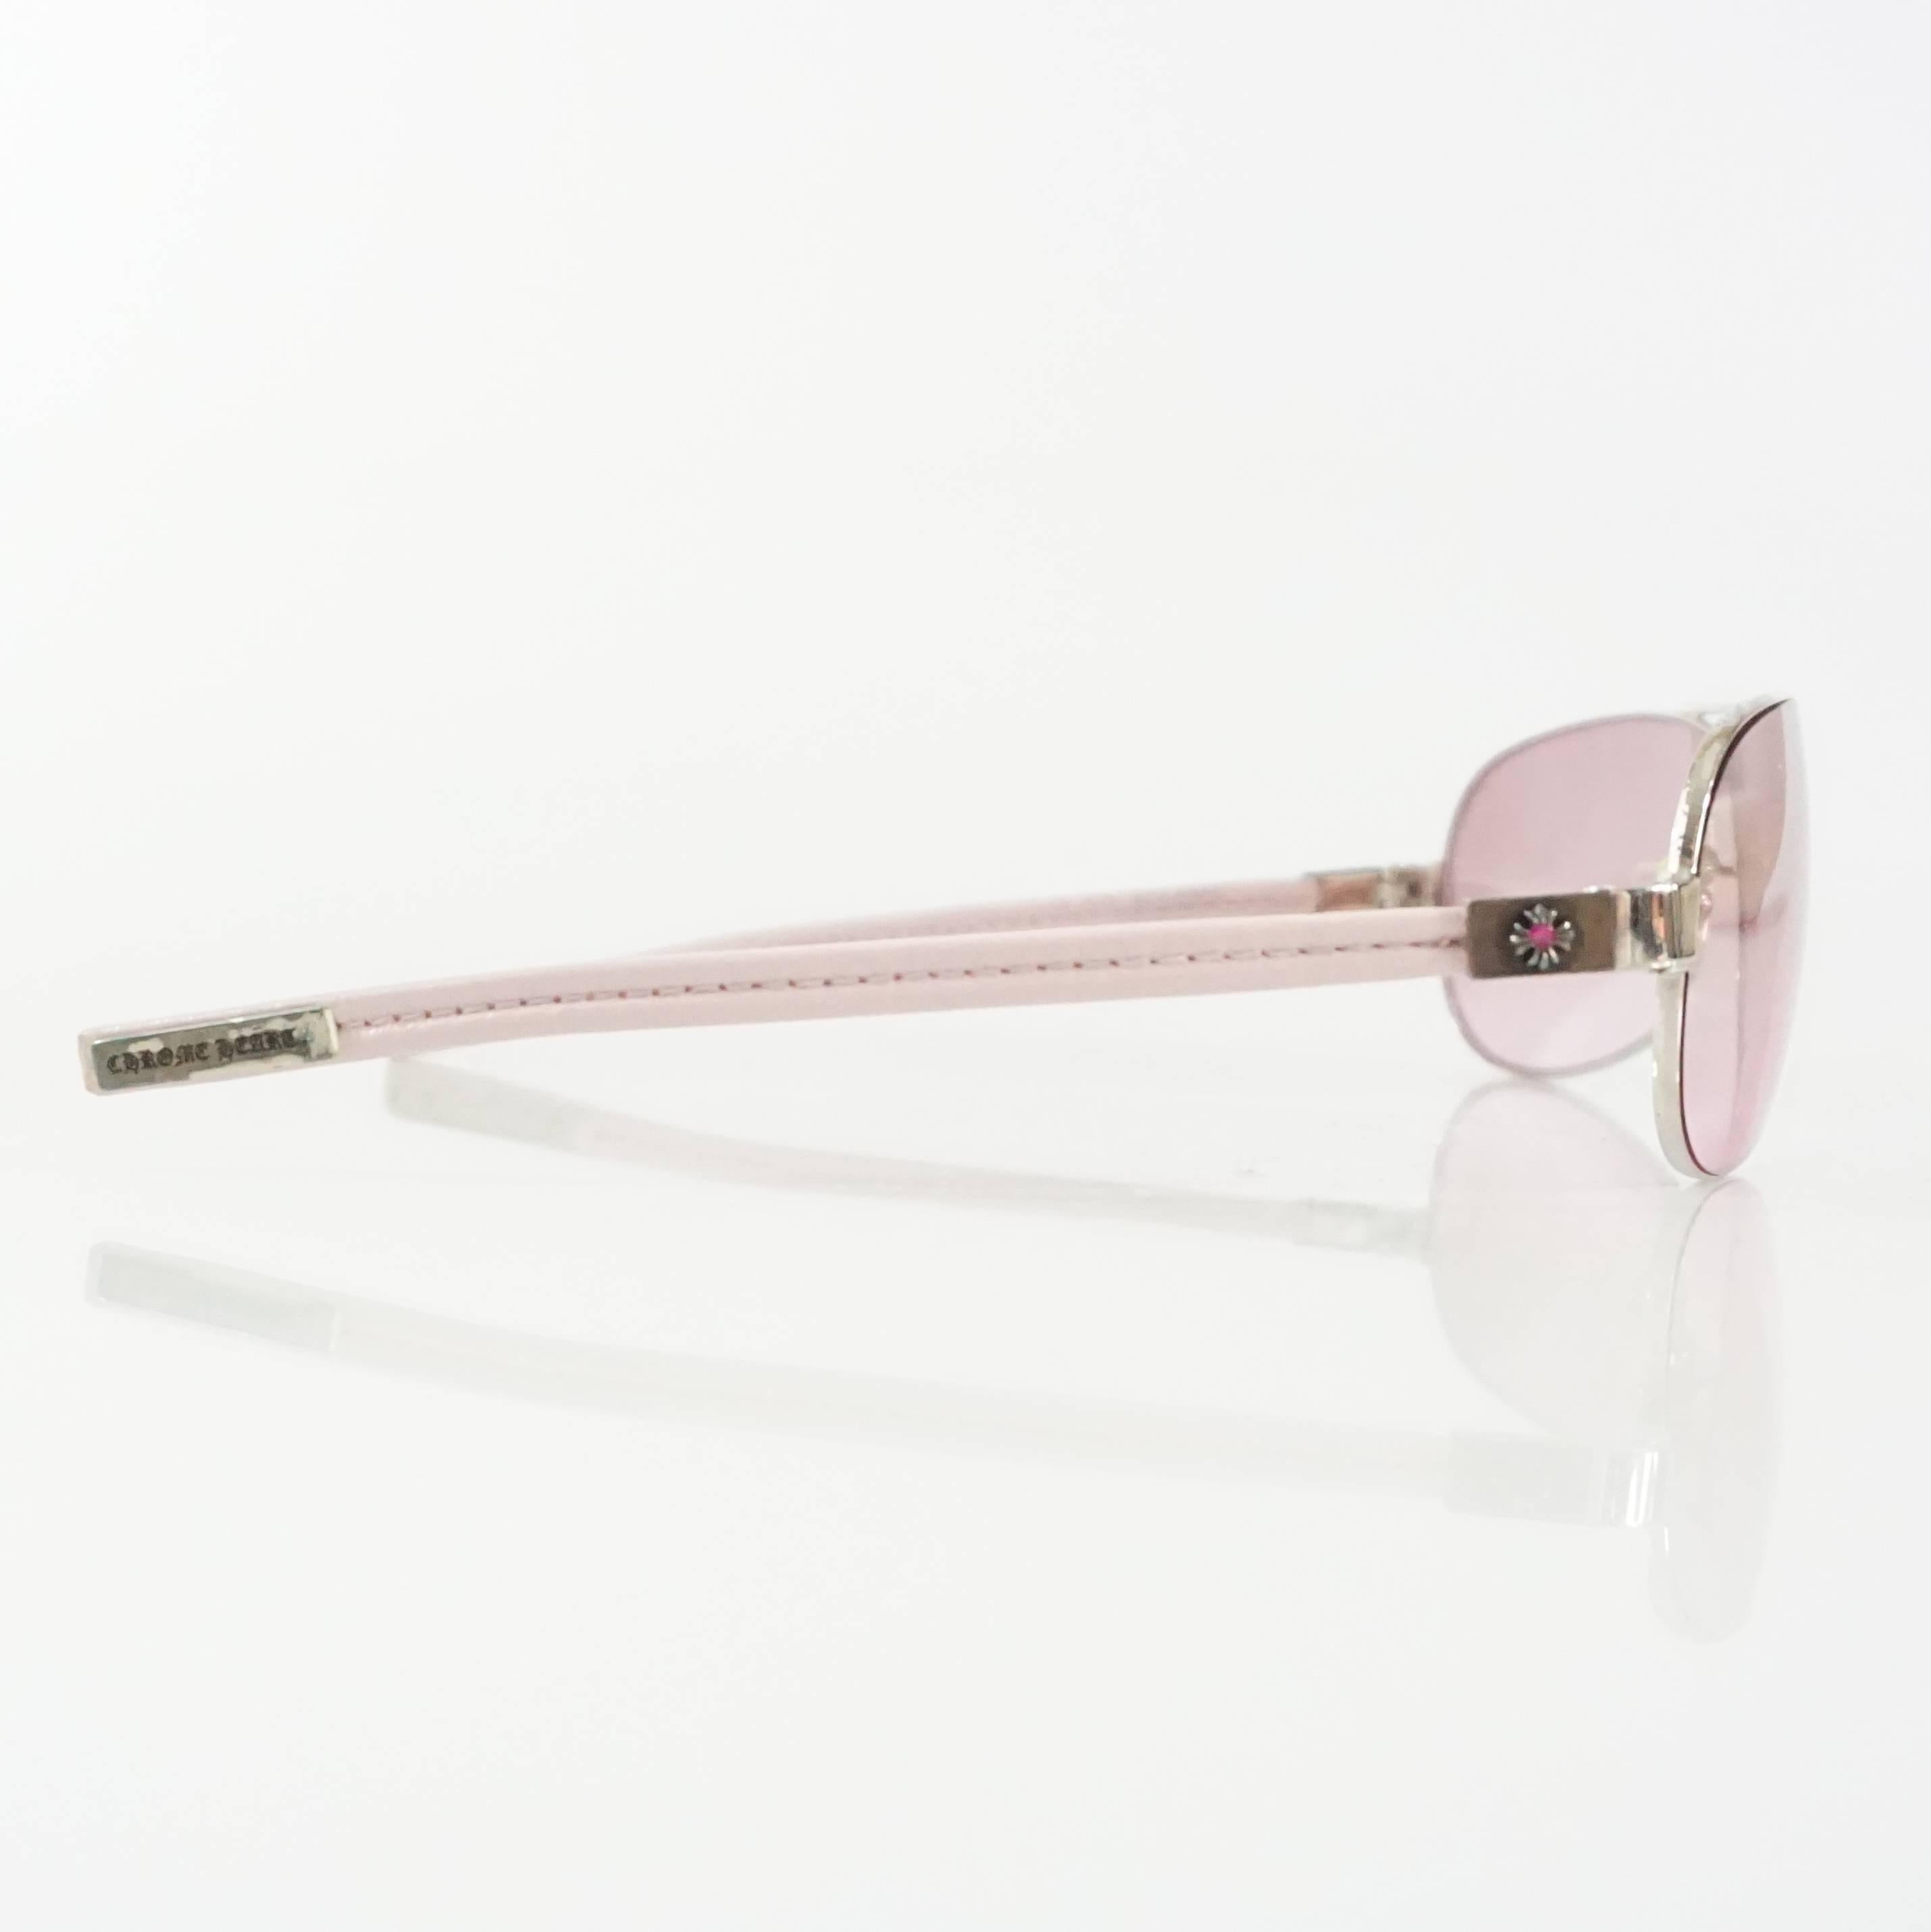 These Chrome Hearts sunglasses feature pink lenses and legs covered in pink fabric. They have a pink rhinestone and silver detailing on the side close to the lenses. These sunglasses are in very good condition with very minimal